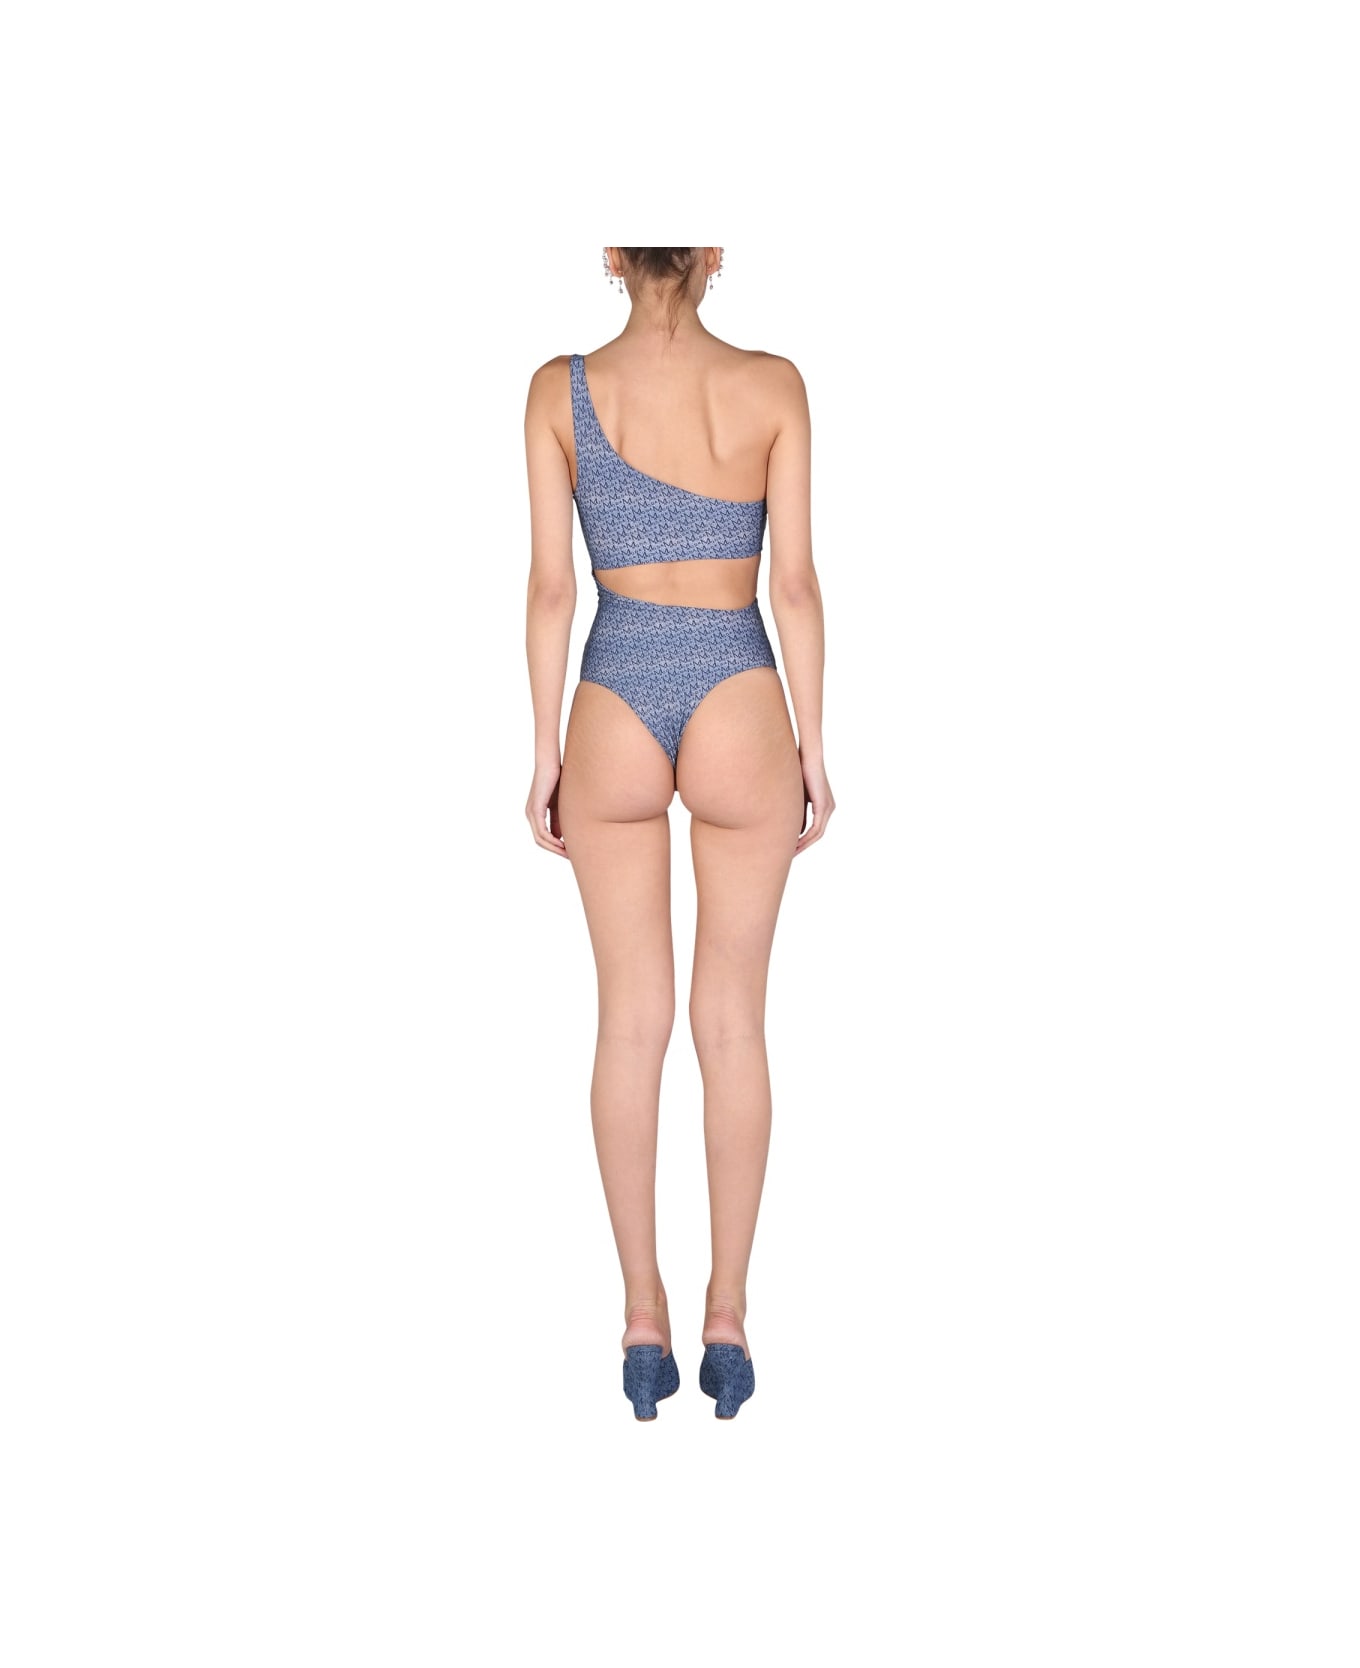 Magda Butrym One Piece Cut-out Swimsuit - BLUE